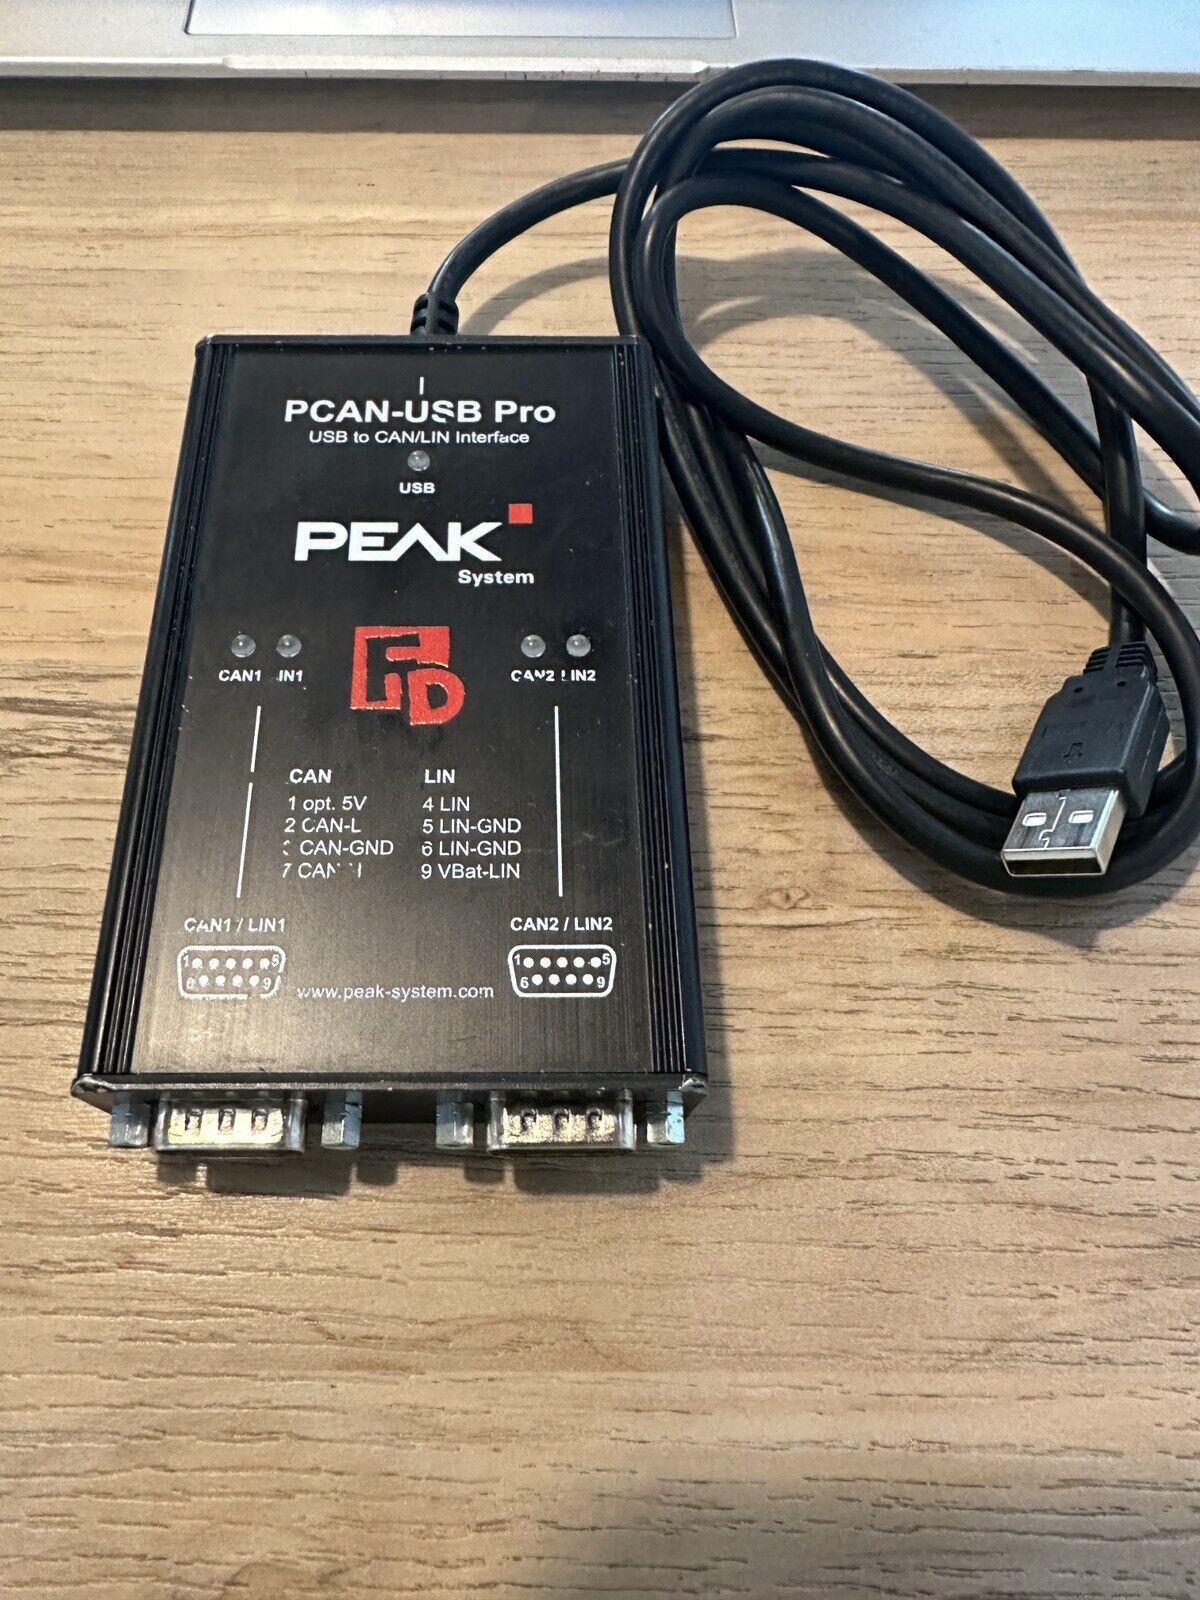 Peak PCAN-USB Pro FD, USB to dual CAN/LIN Interface, used